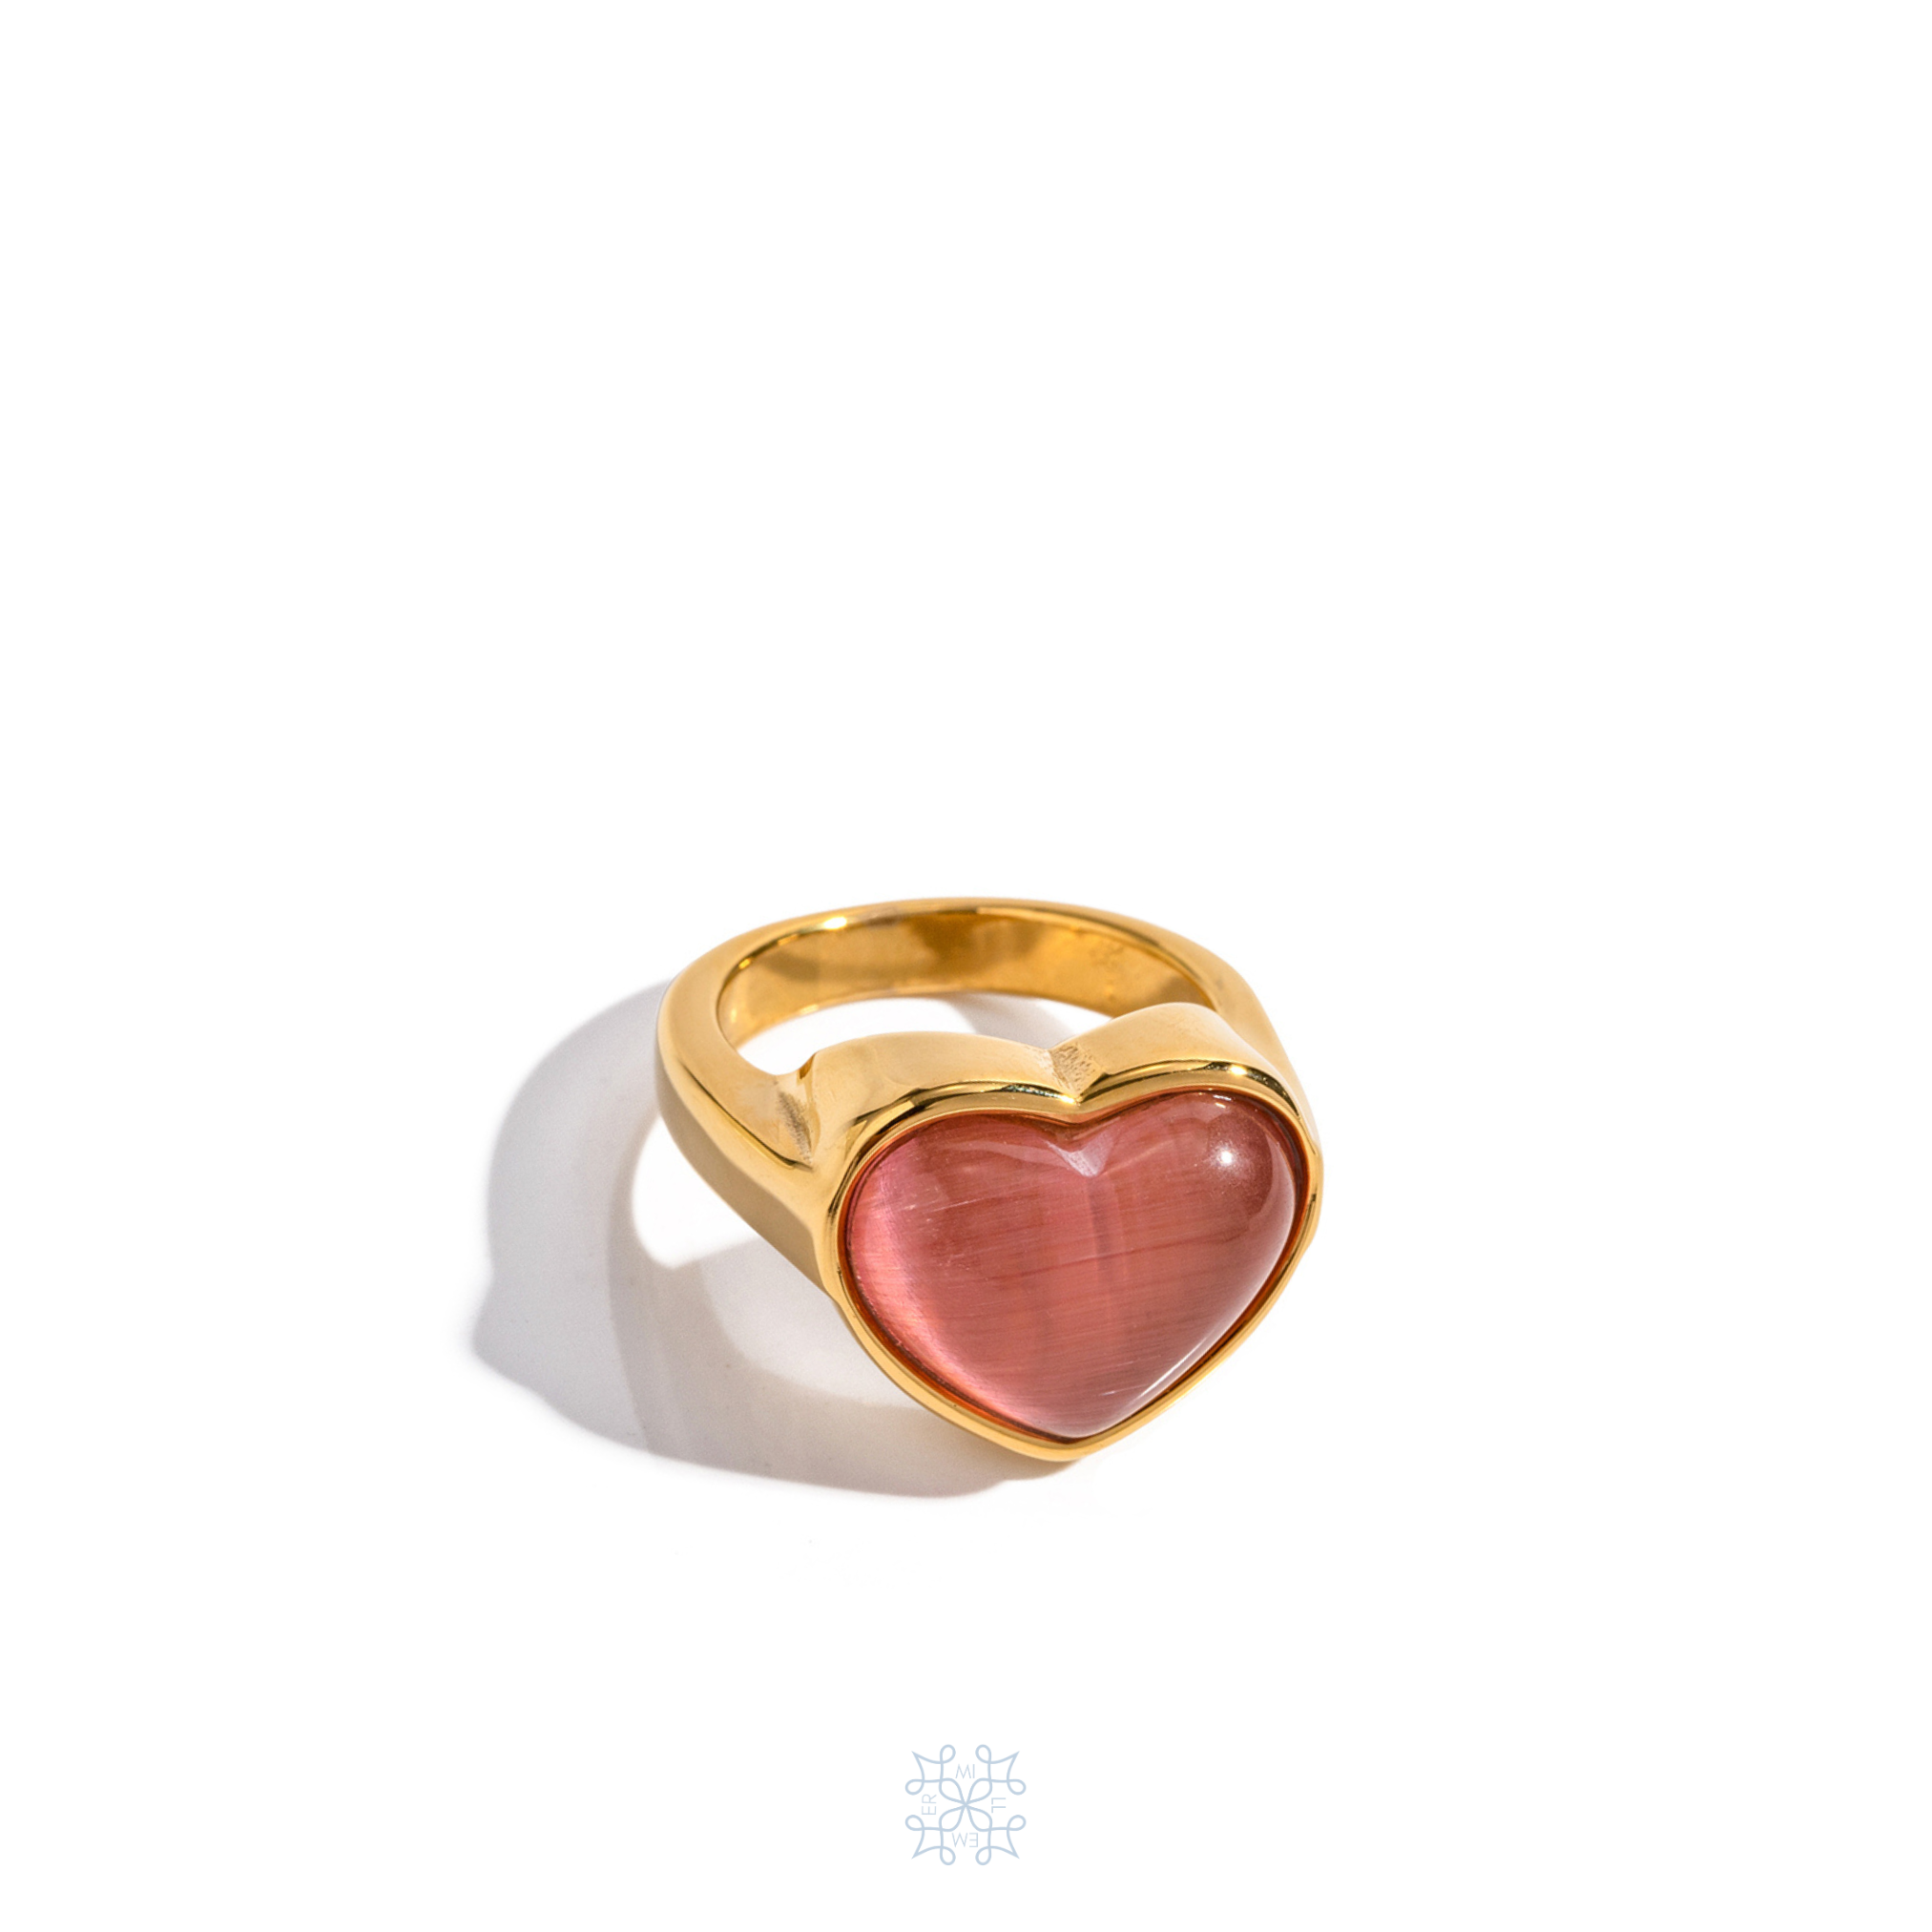 Gold Heart ring. Pink cat eye stone heart shape in the top of the ring. Barbie Pink Heart Gold Ring. 